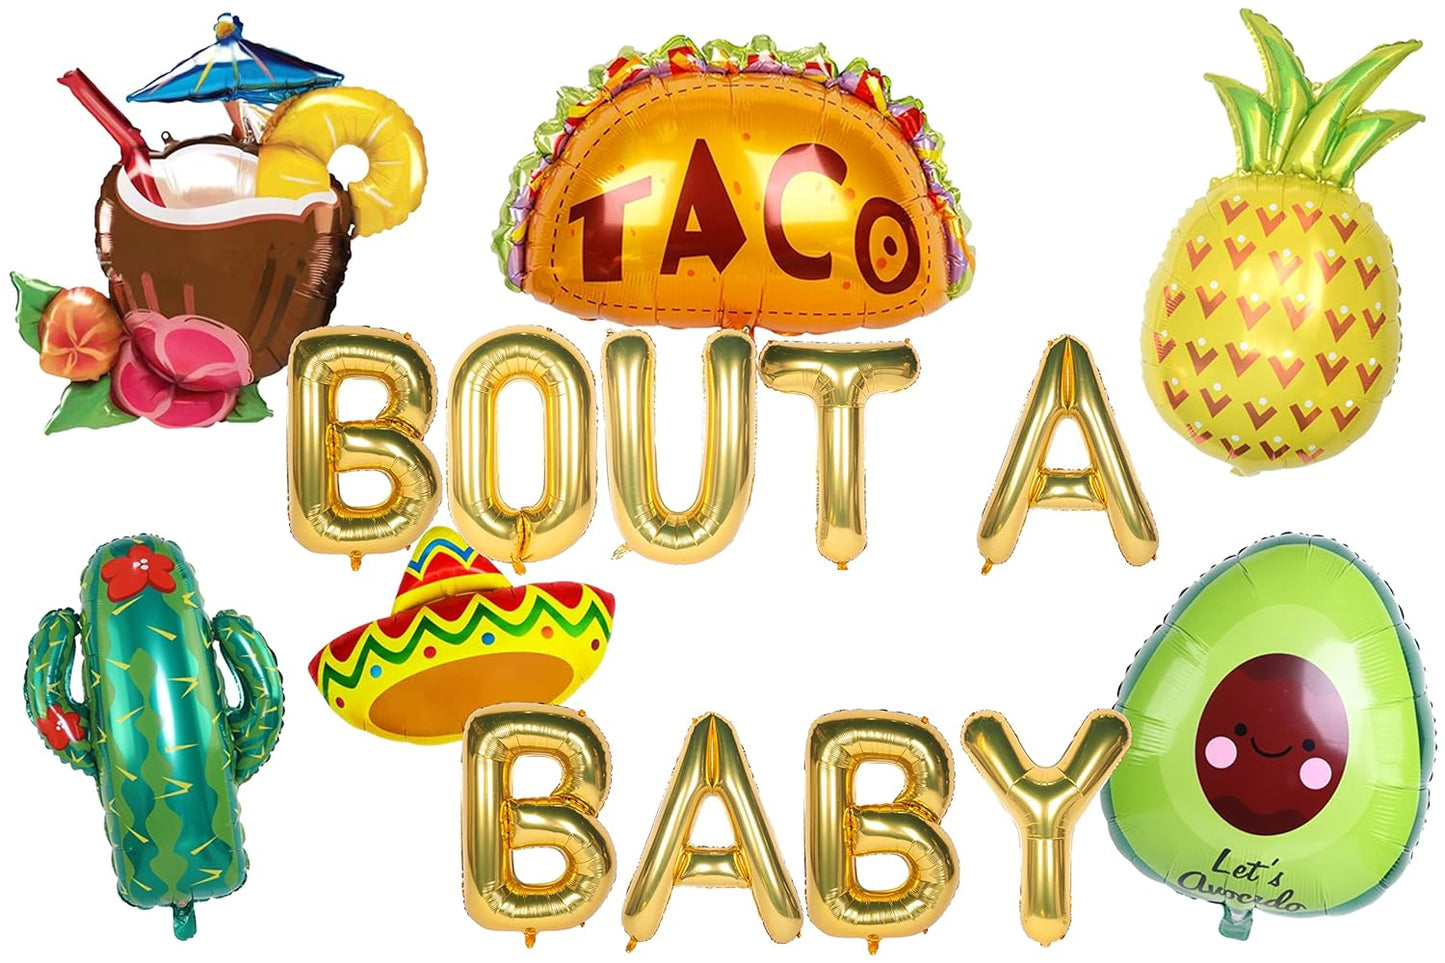 Mexican Theme Baby Shower Title Phrase Taco Bout a Baby Text Foil Balloons for Pregnancy Announcement/Baby Shower Party Decoration